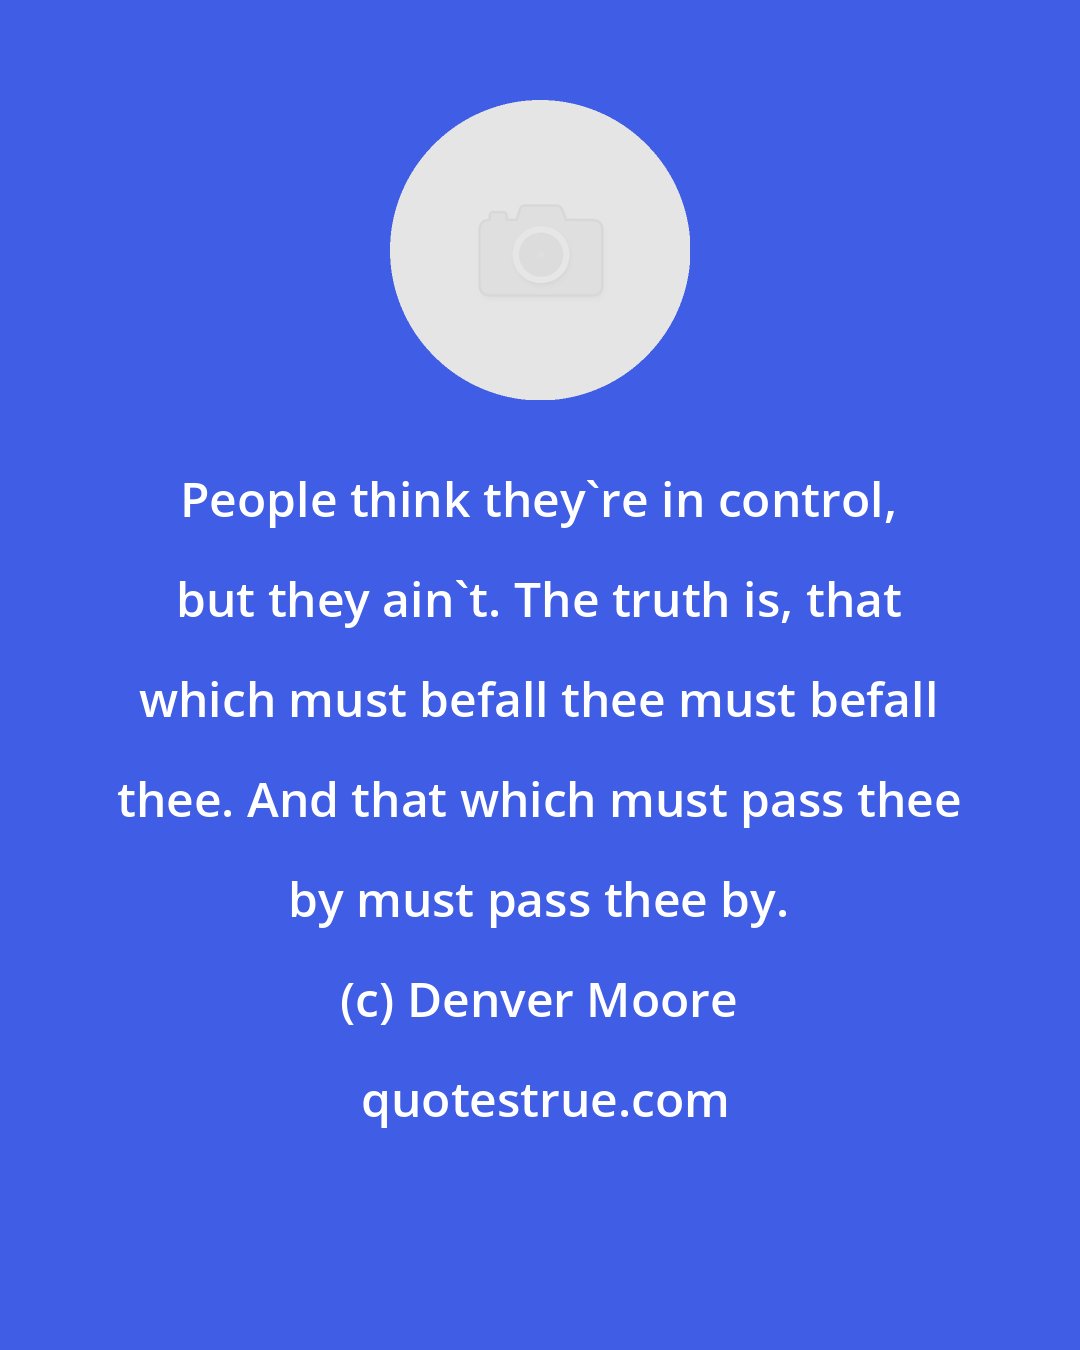 Denver Moore: People think they're in control, but they ain't. The truth is, that which must befall thee must befall thee. And that which must pass thee by must pass thee by.